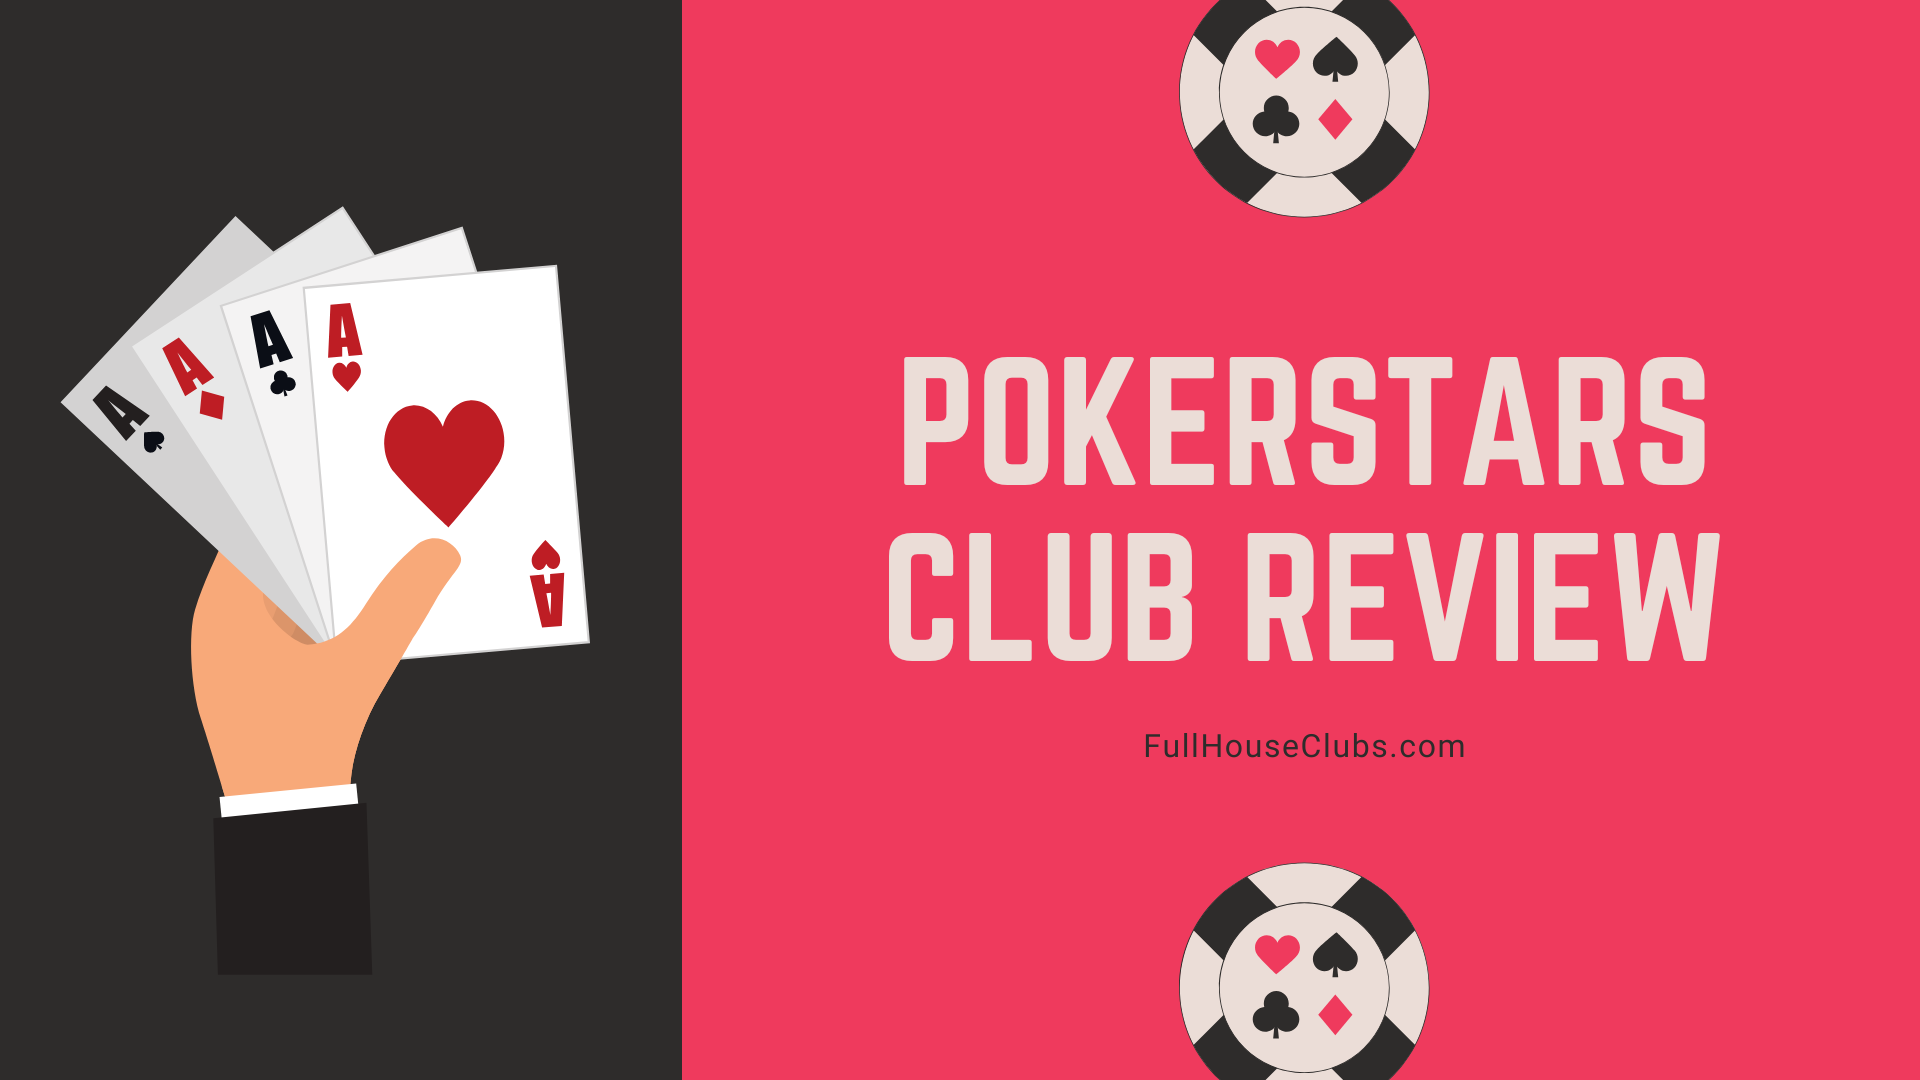 Effectiveness lake nickel Best PokerStars Review Clubs 2022 - Full House Clubs